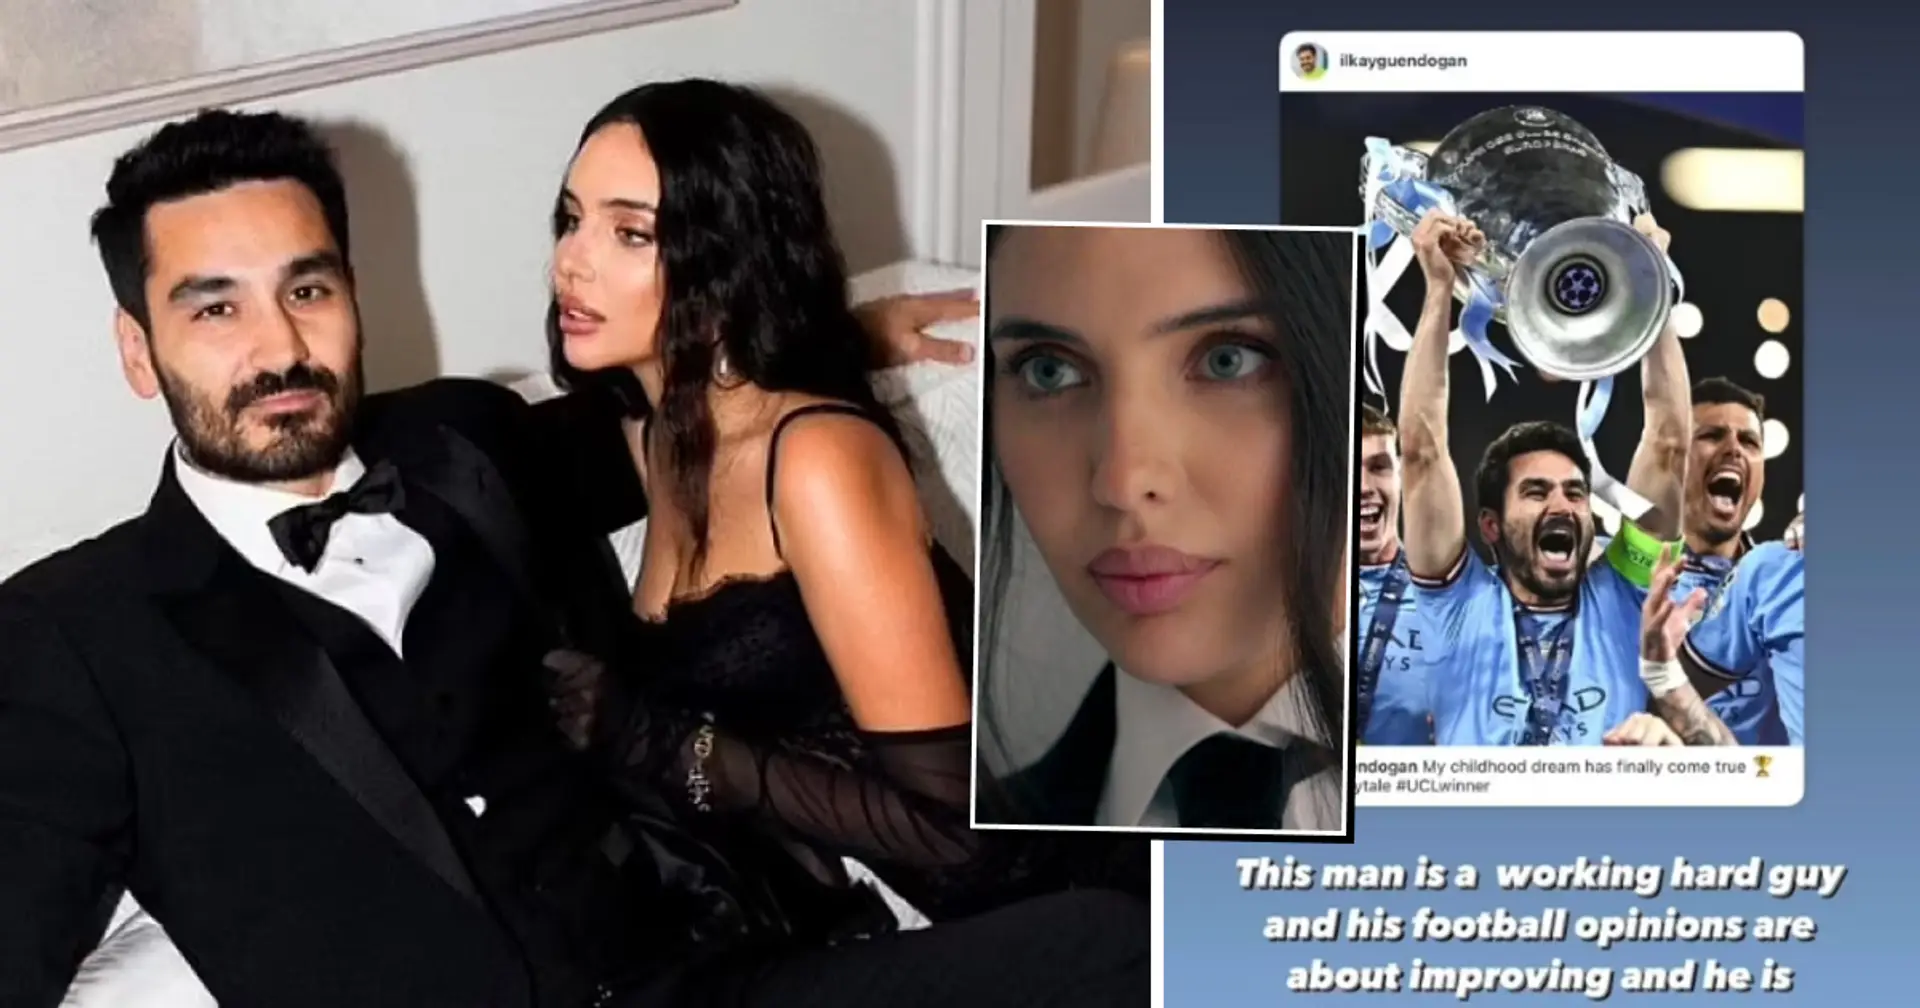 Gundogan's wife defends hubby amidst criticism for controversial comments after PSG game